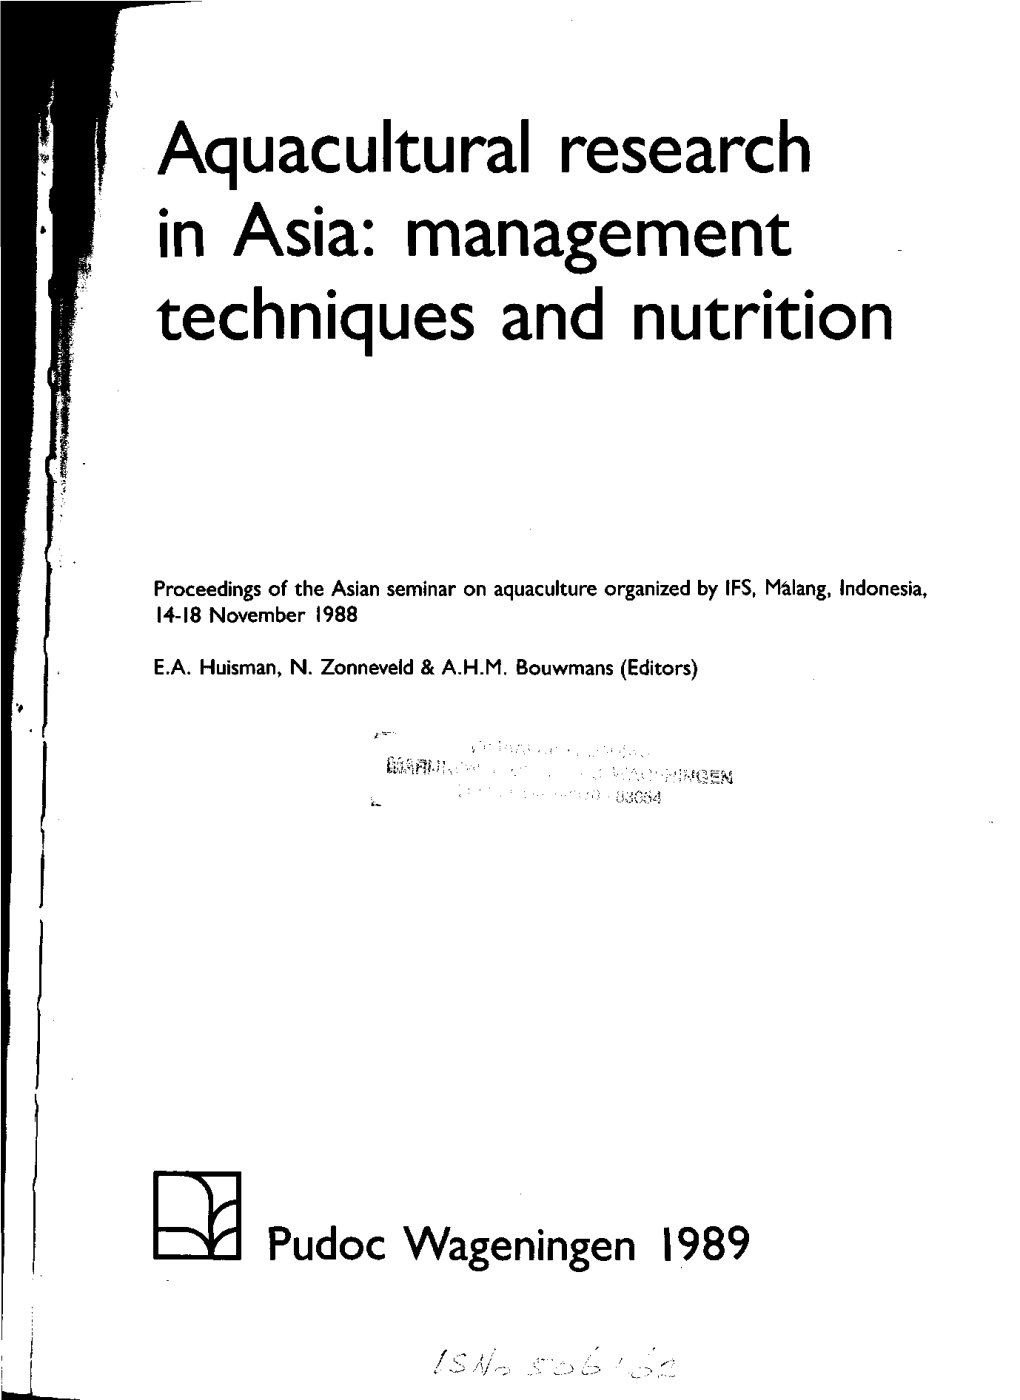 Aquacultural Research in Asia: Management Techniques and Nutrition